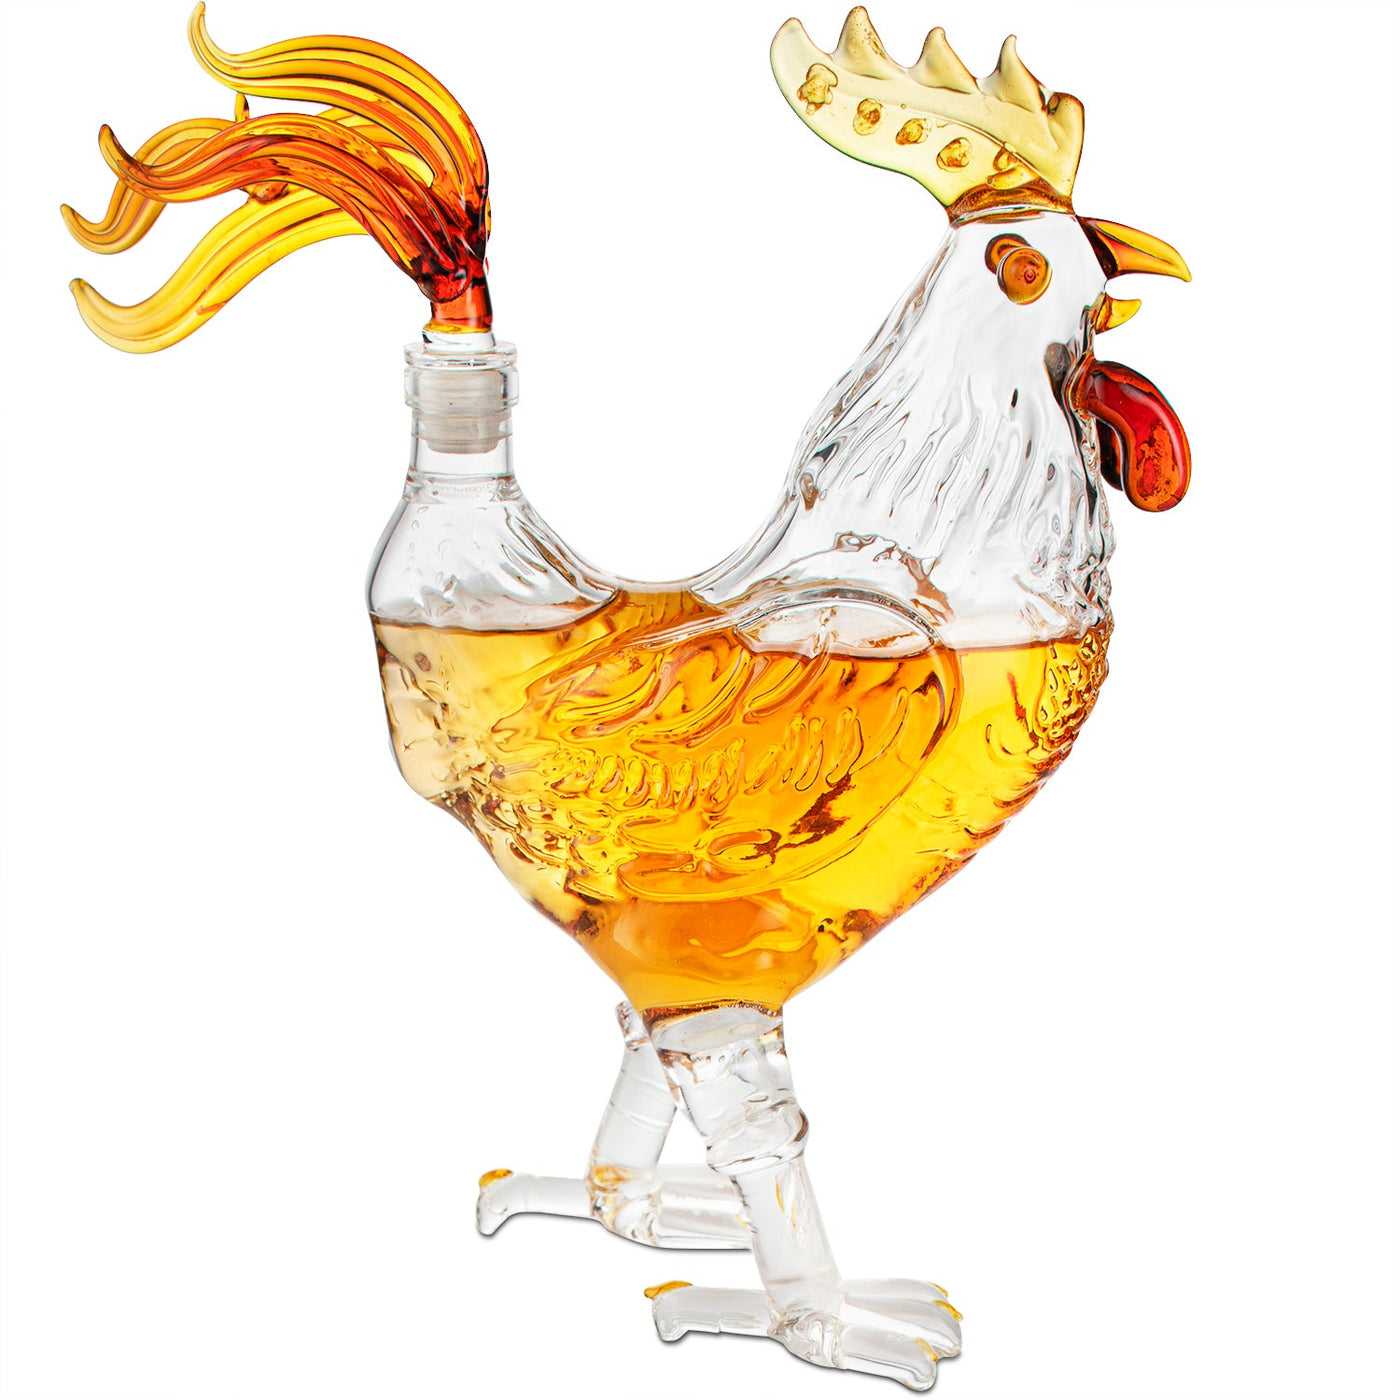 Cock - Chicken Decanter 500ml Whiskey and Wine Decanter - by Liquor Lux, Rooster Glass Decanter For Whiskey, Scotch, Spirits, Wine Or Vodka For Whiskey Lovers